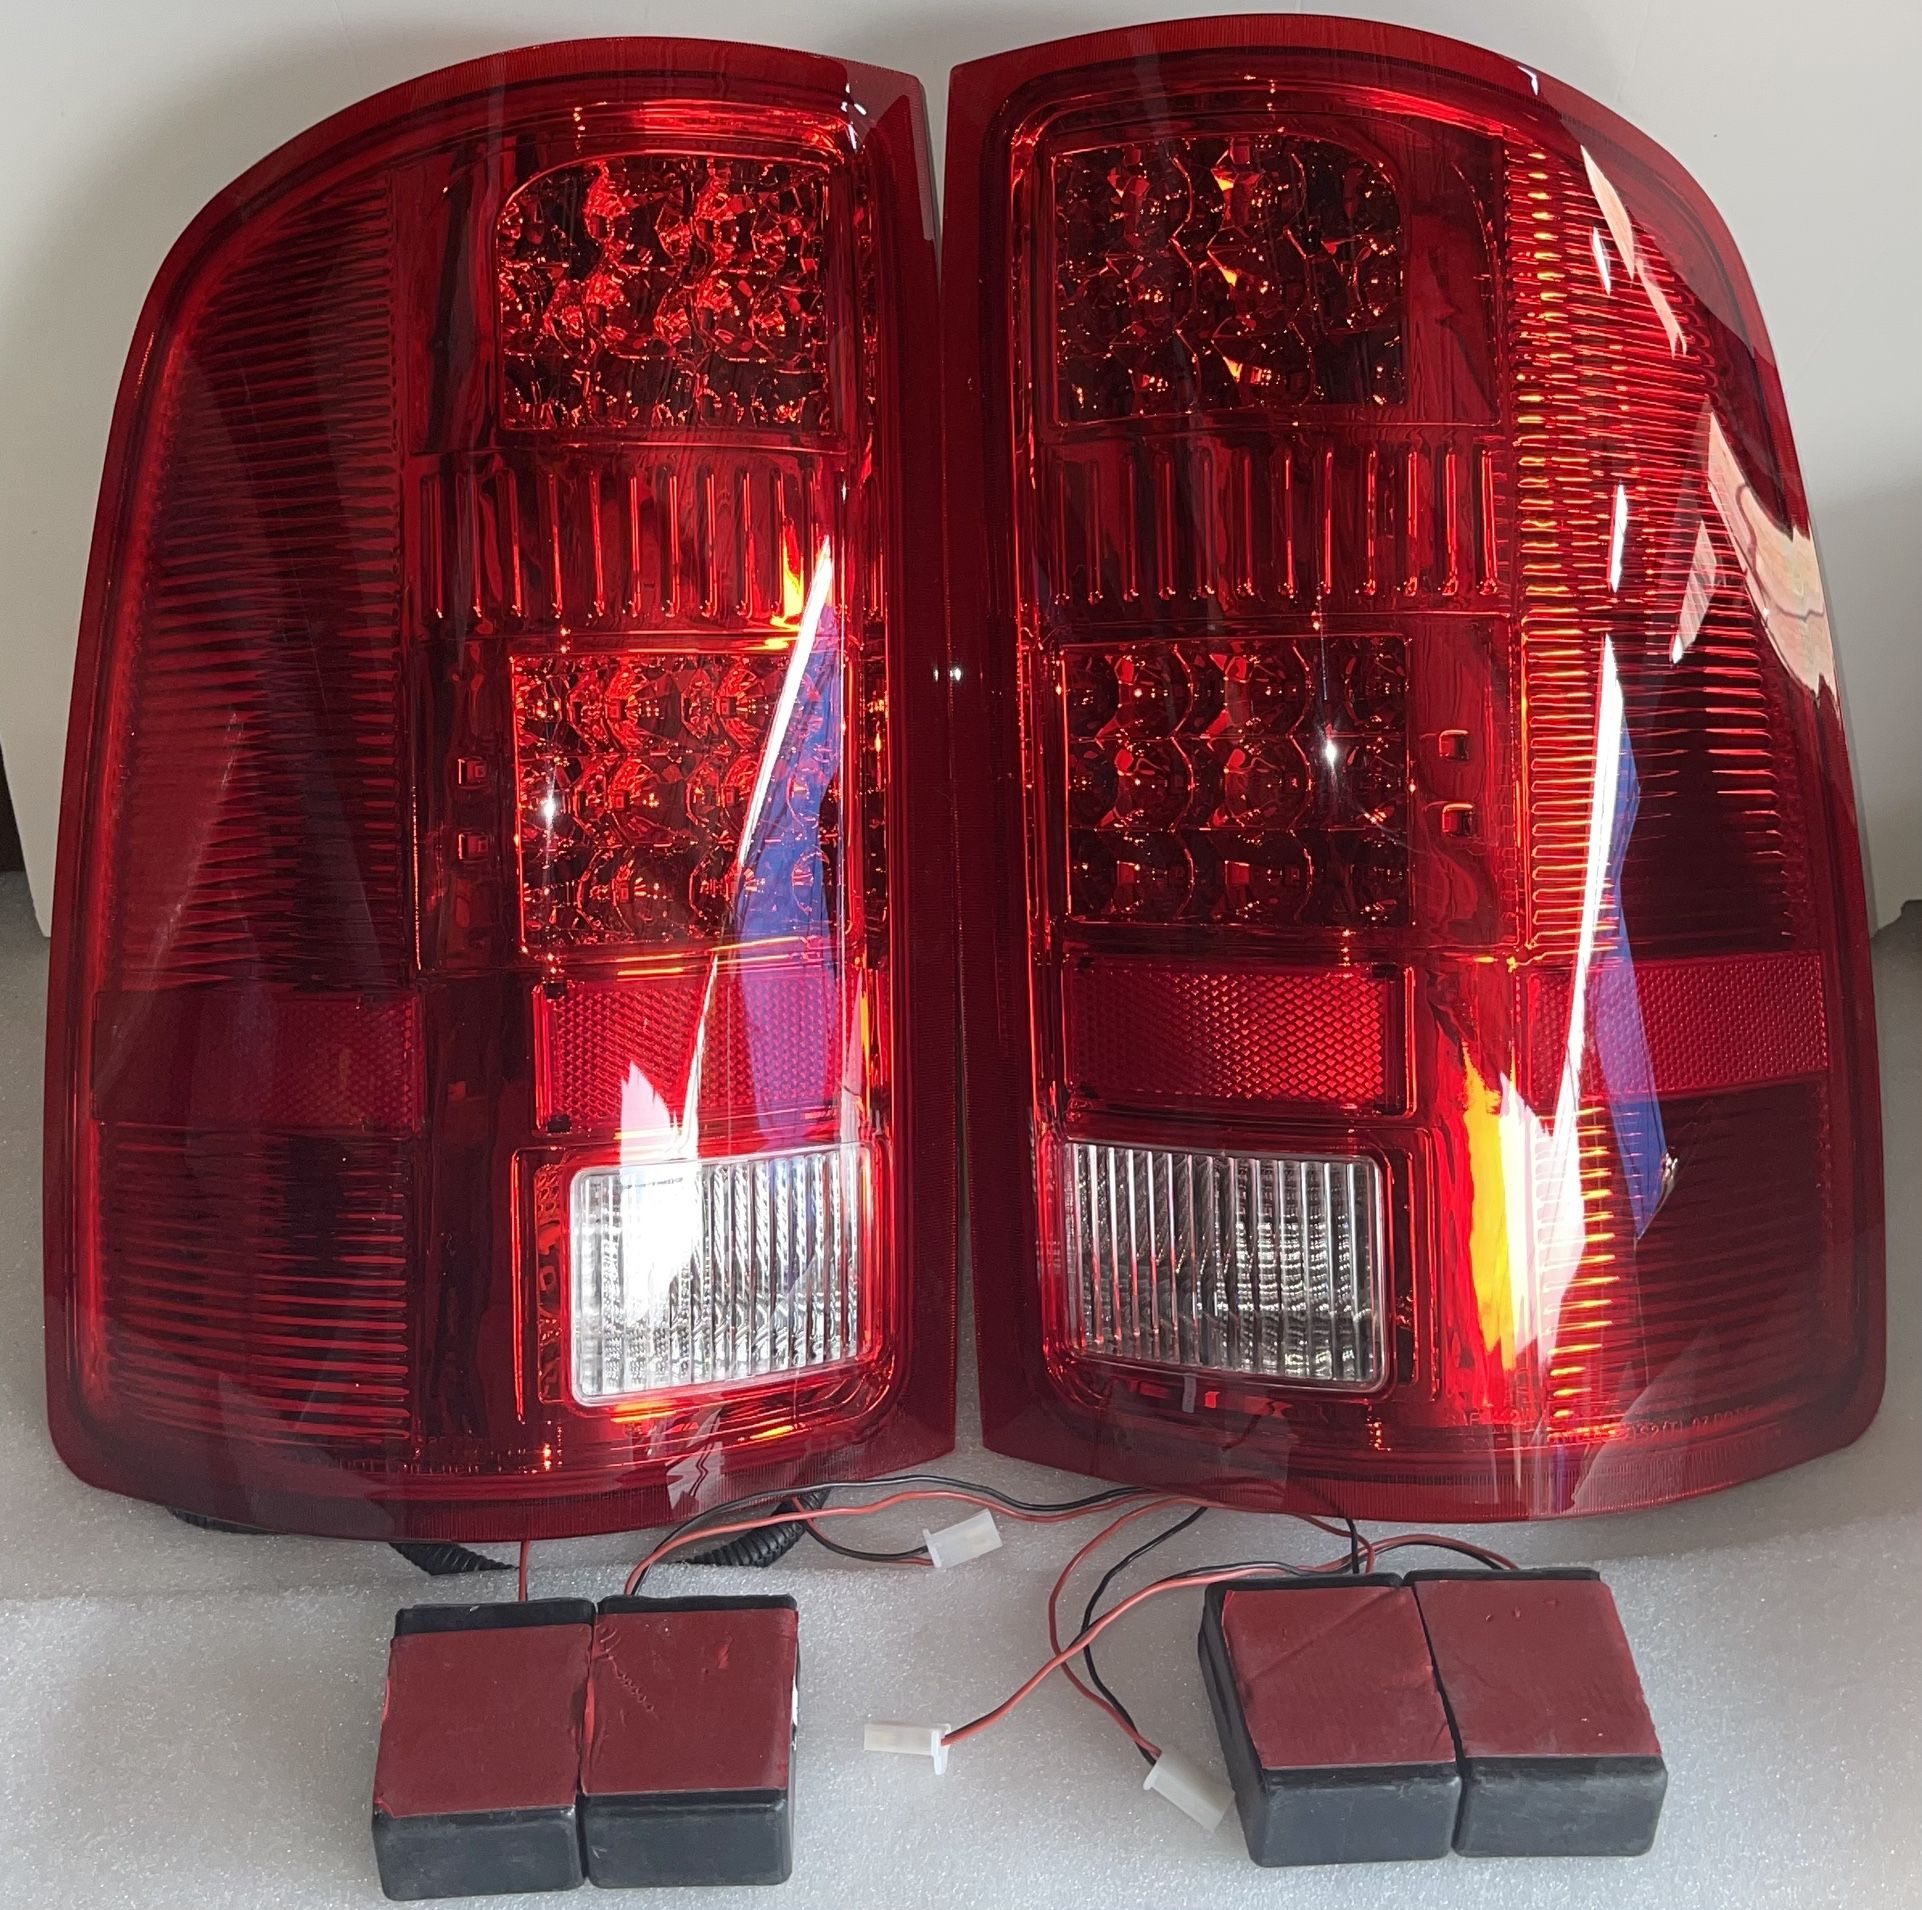 GMC Sierra LED Tail Lights for 2007 to 2013